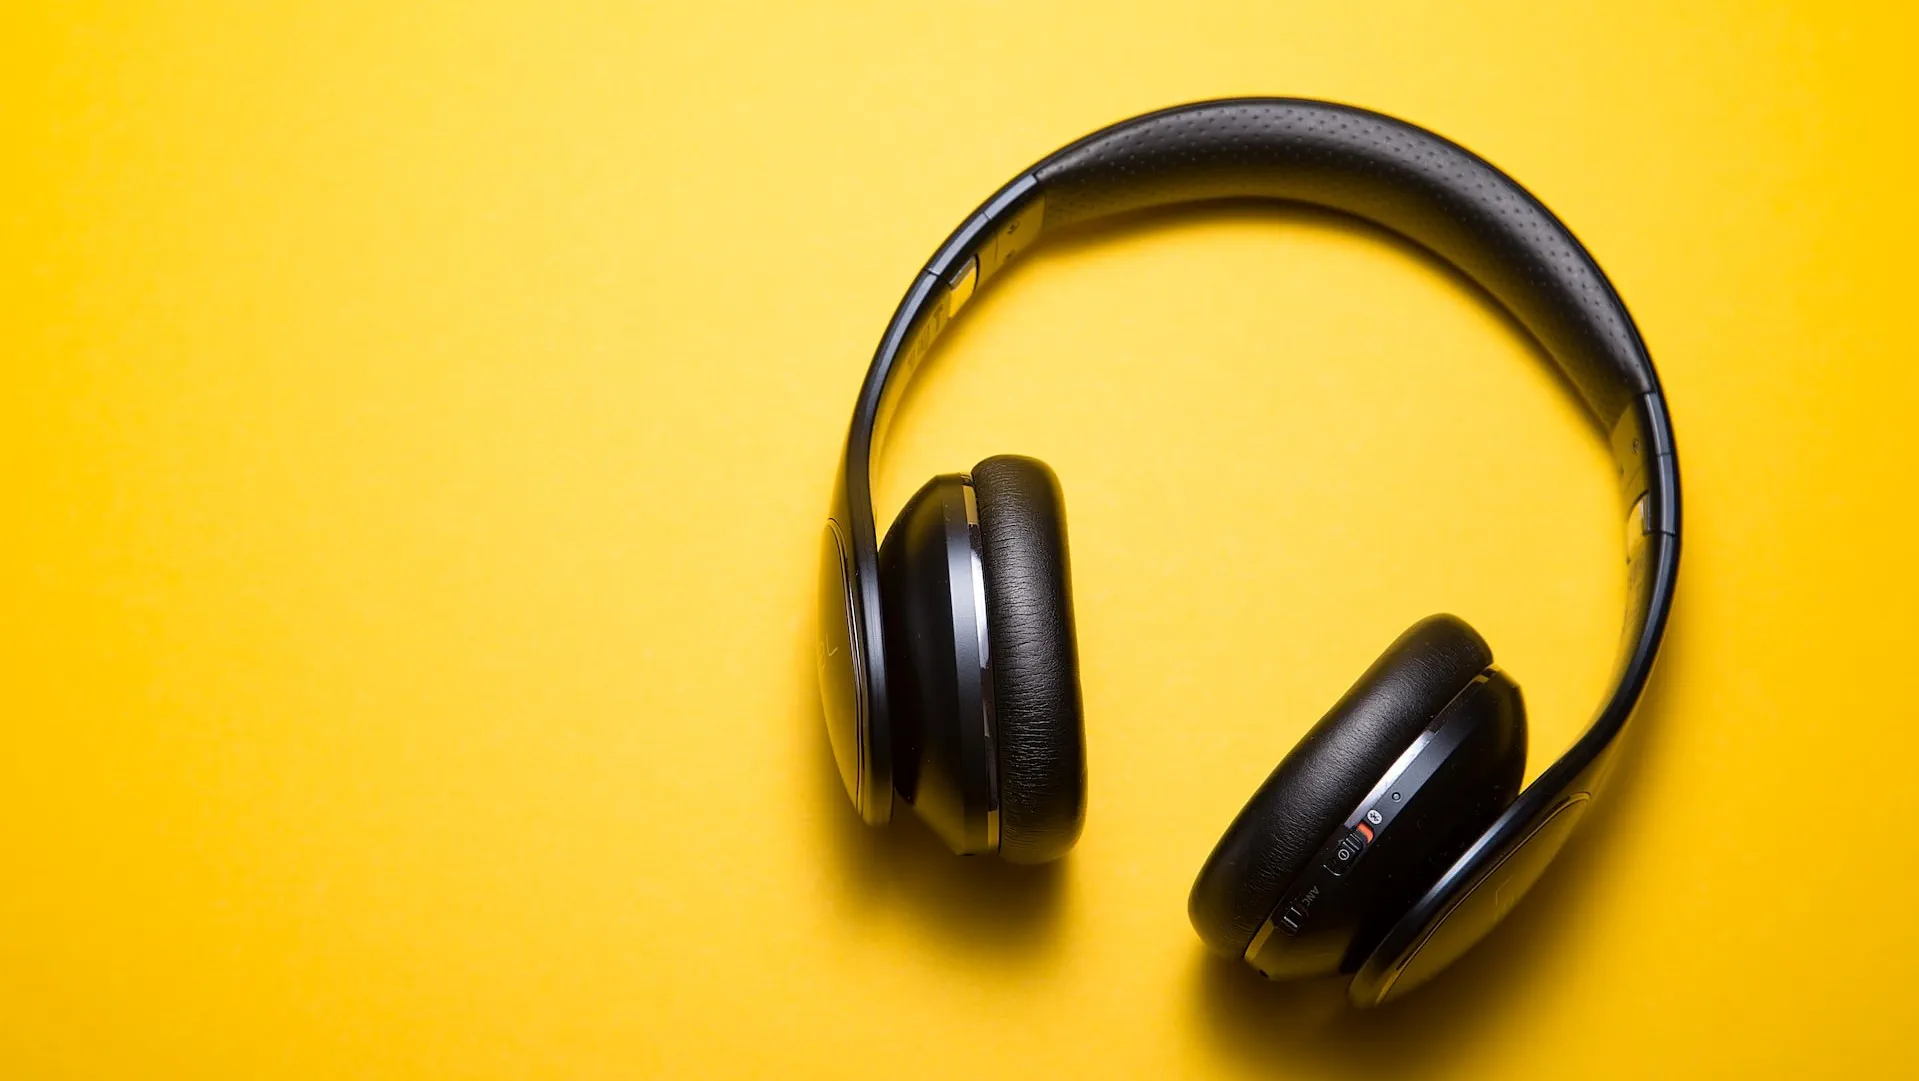 Headphone on a yellow background